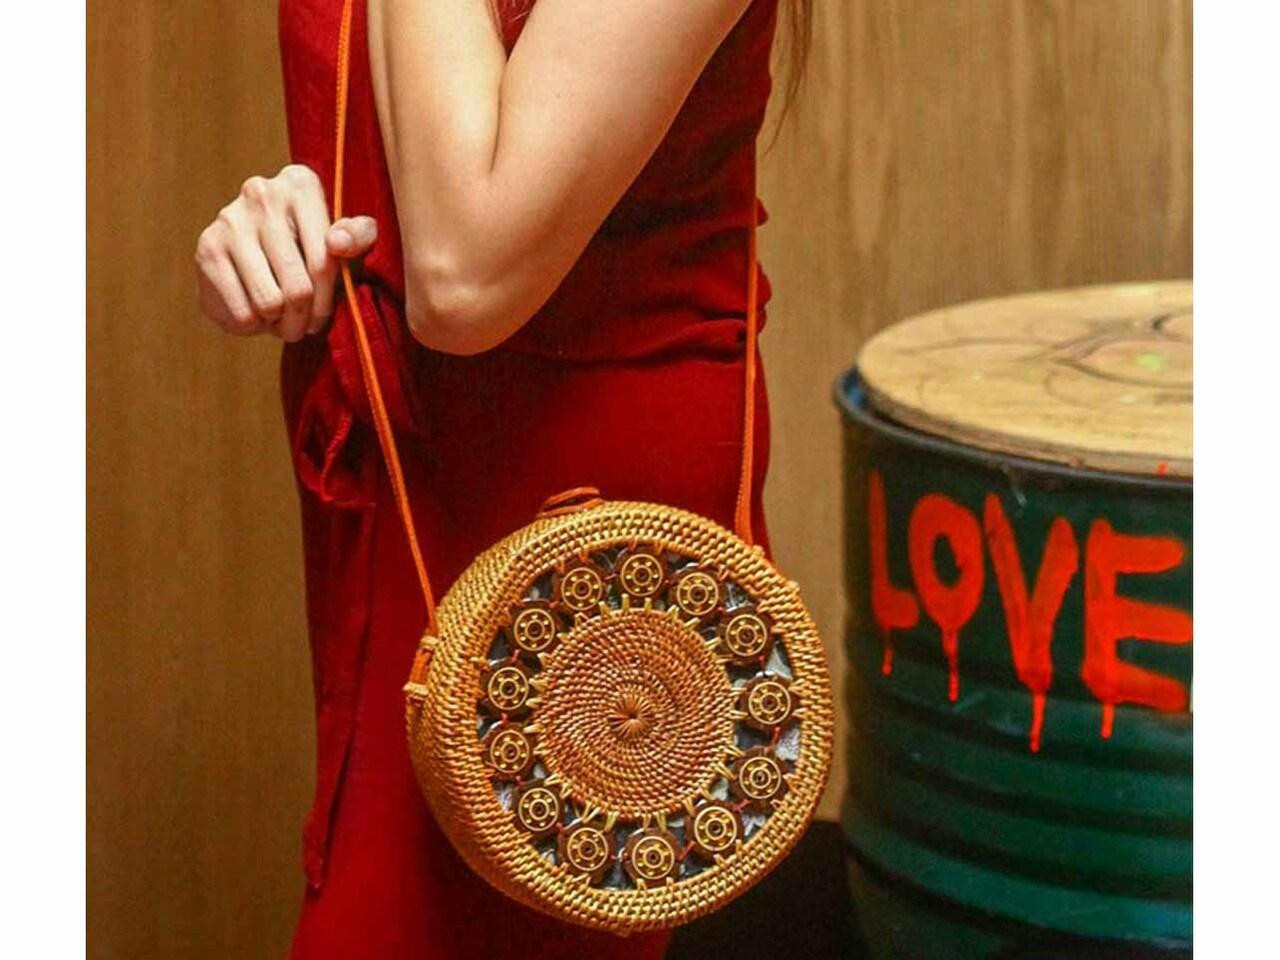 Round Rattan Bag for Women Straw Bag Handwoven Beach Bohemian Shoulder Purse  by Enmain, 2-style, One size price in UAE | Amazon UAE | kanbkam